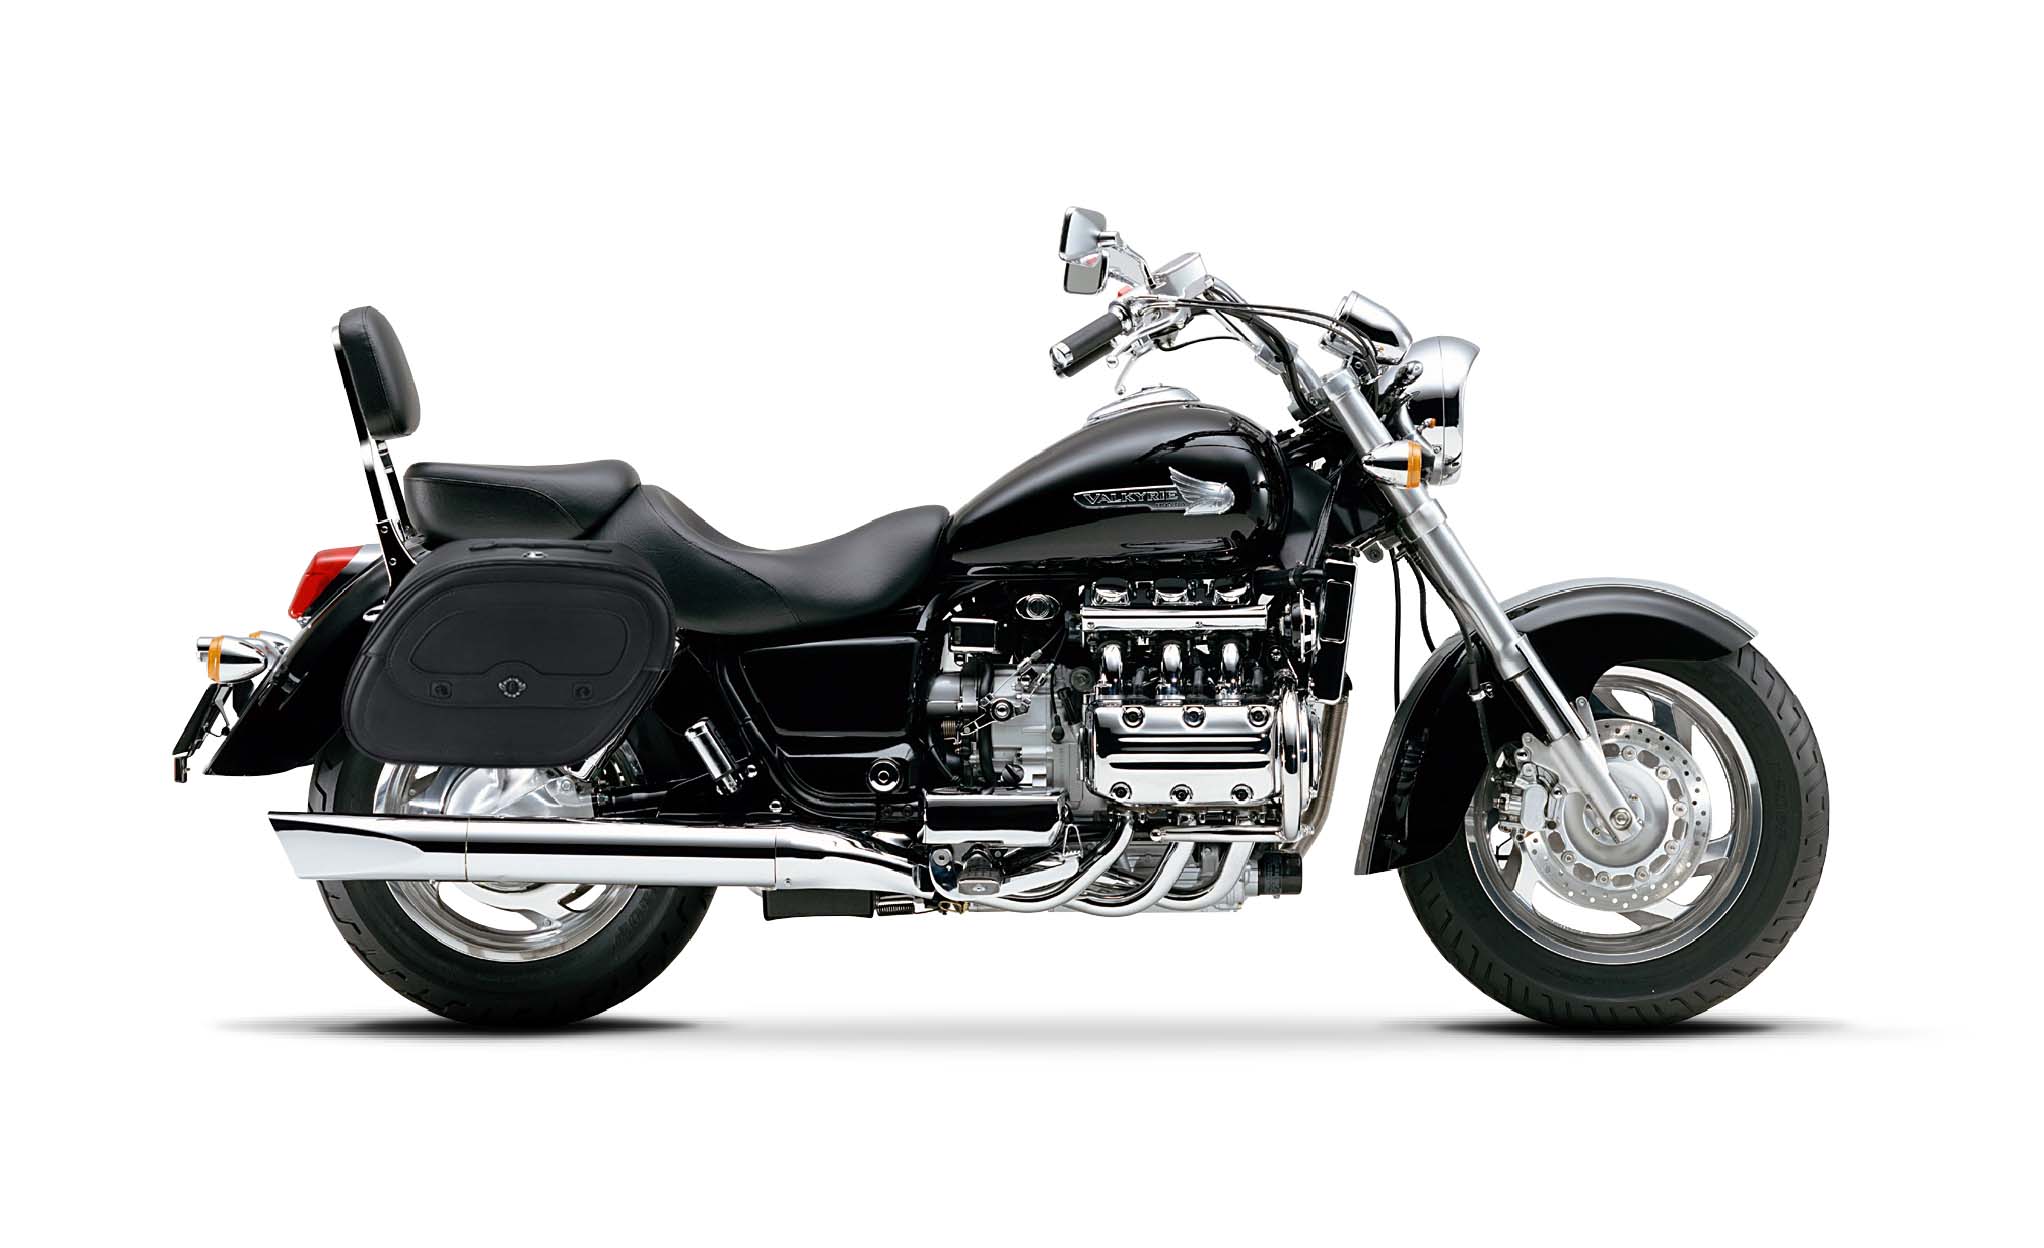 Viking Spear Shock Cut Out Large Honda Valkyrie 1500 Standard Leather Motorcycle Saddlebags on Bike Photo @expand